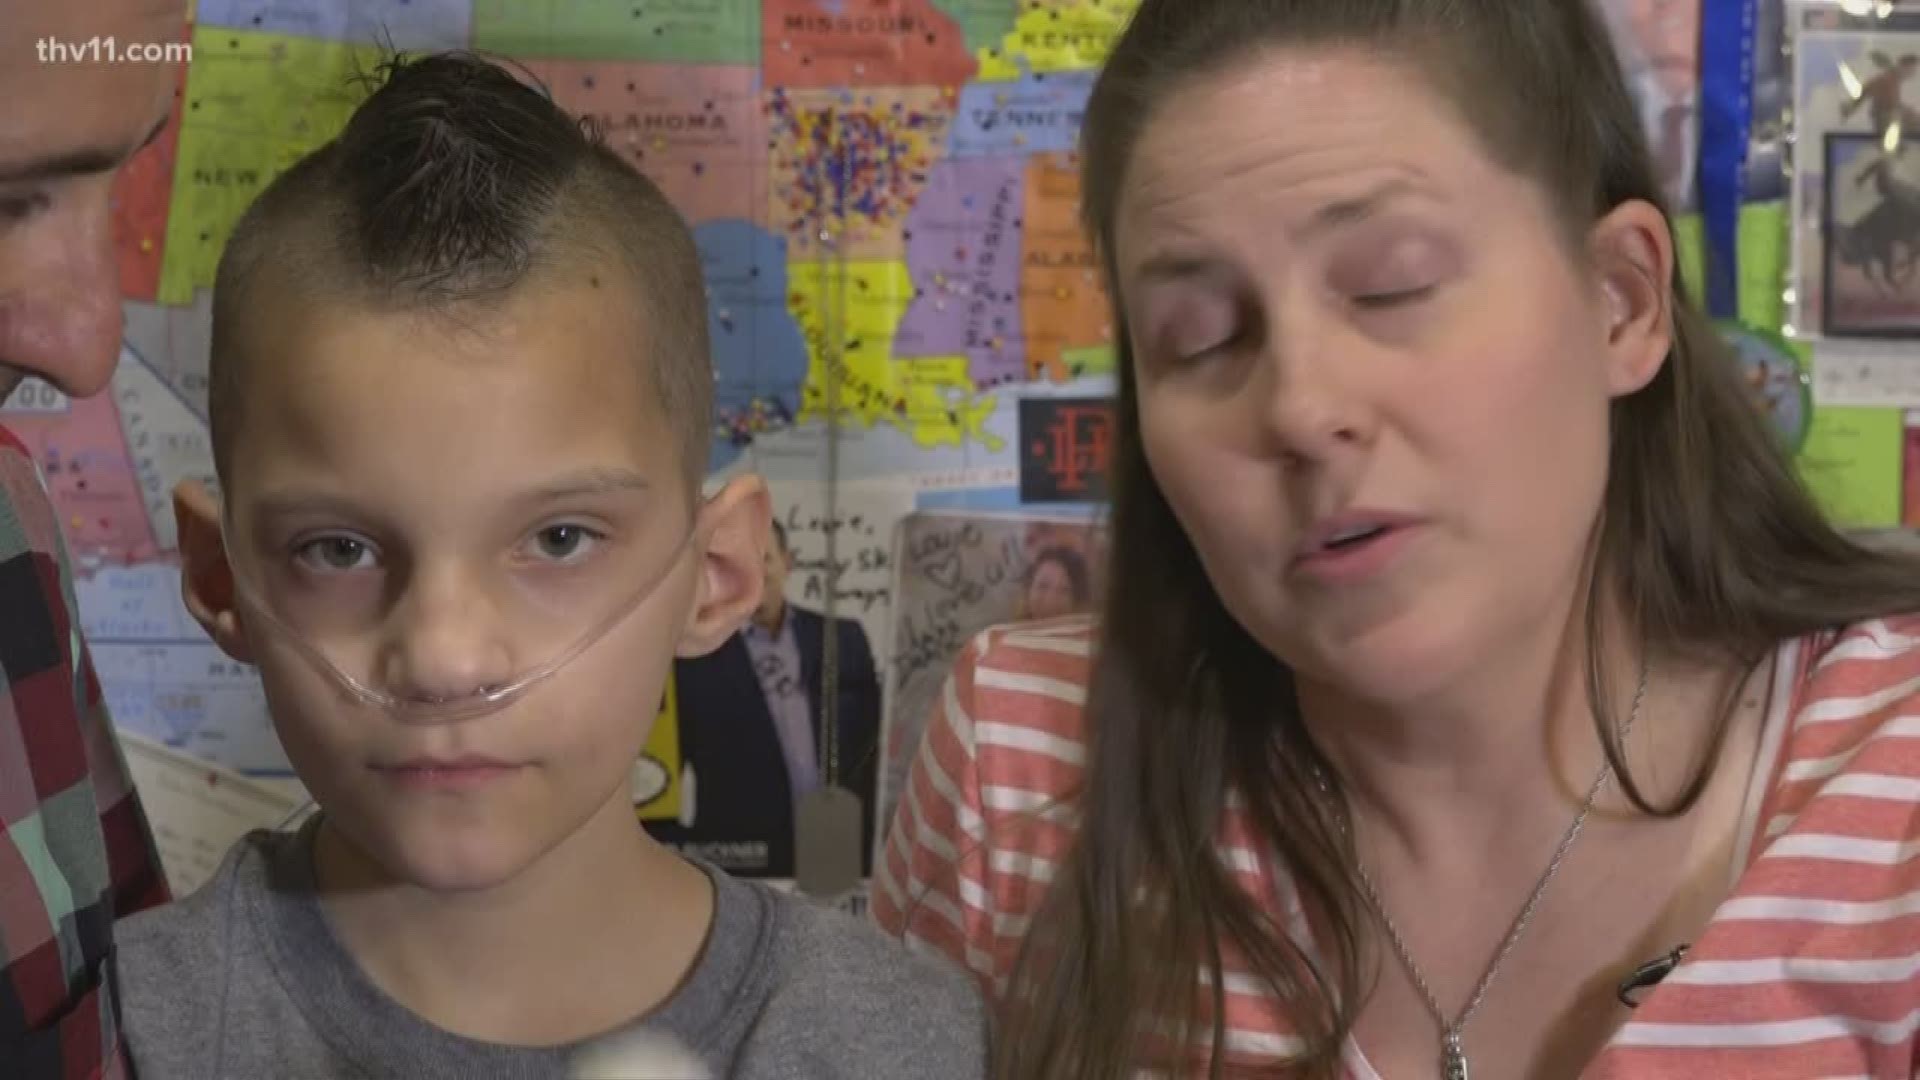 If you are an avid THV11 viewer, then you know 10-year-old Louie for his incredible way of making people smile even as he faces some of life's biggest challenges.